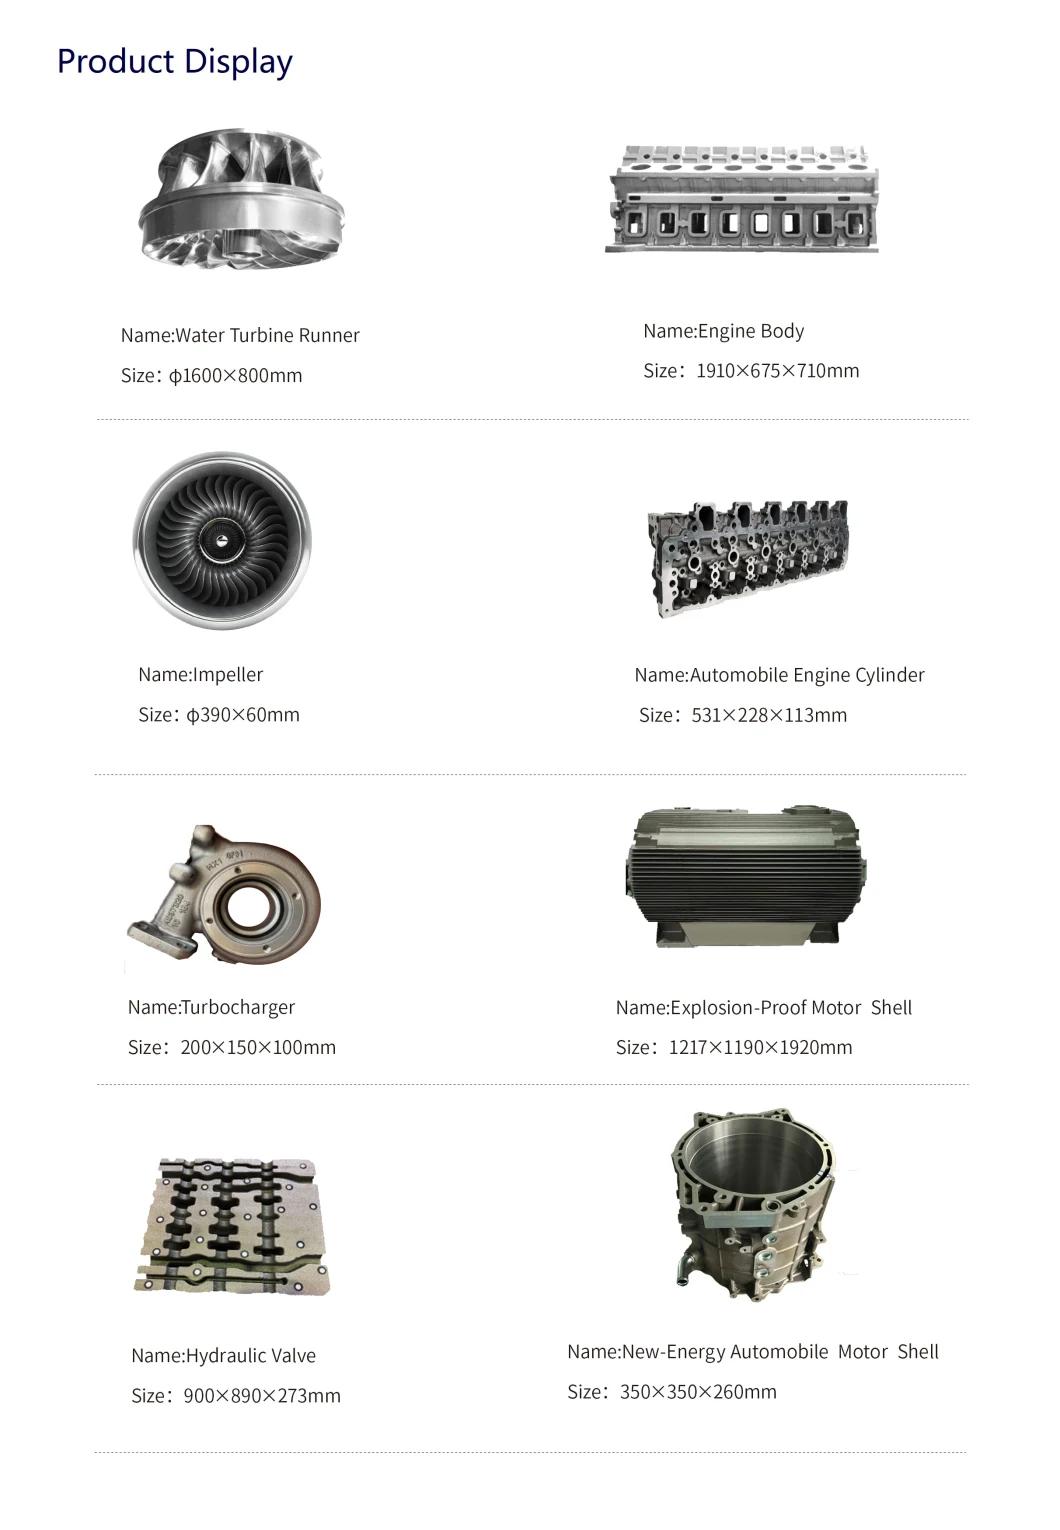 KOCEL Industrial Customized Auto Car Motorcycle Spare Part Foundry Accessory Casting Metal Part Sand Casting